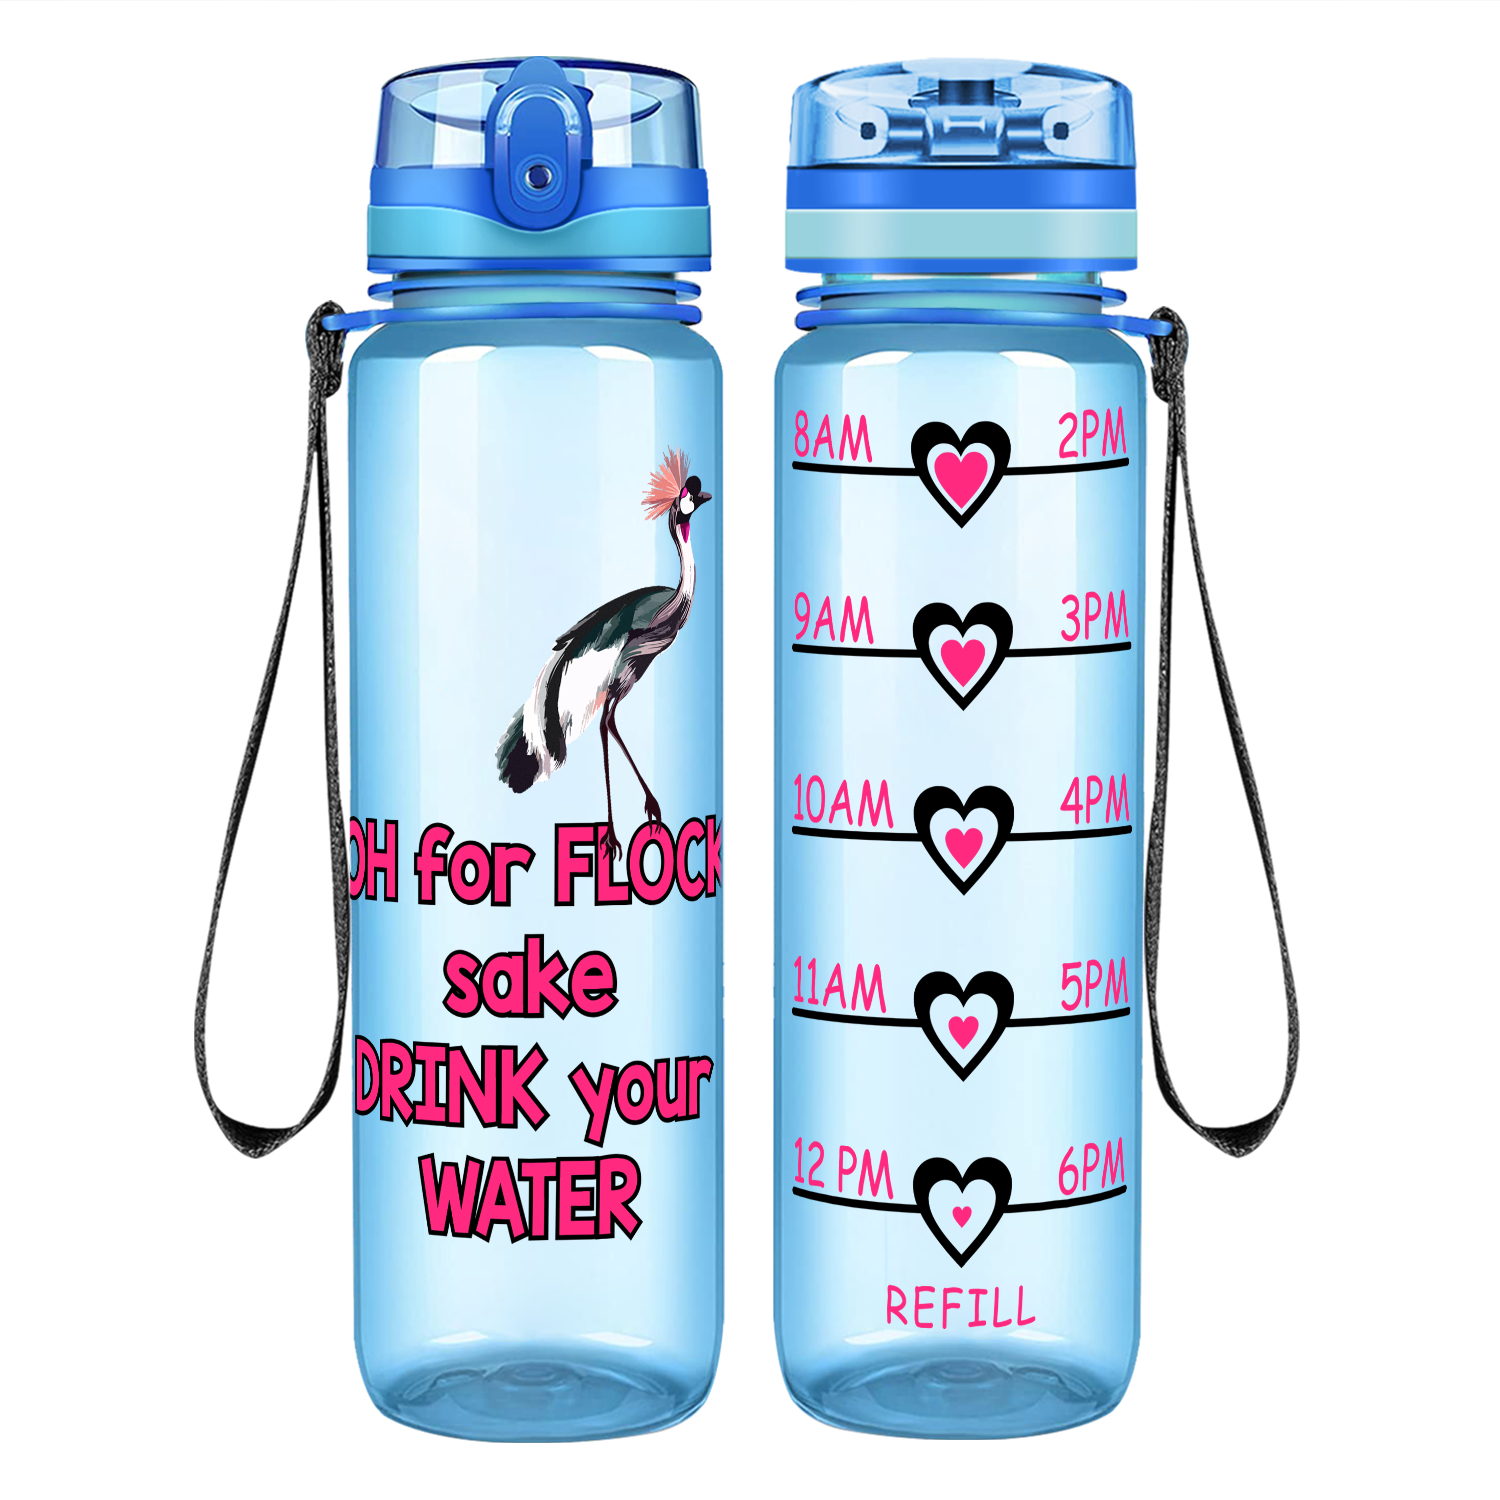 Flock Drink Your Water on 32 oz Motivational Tracking Water Bottle